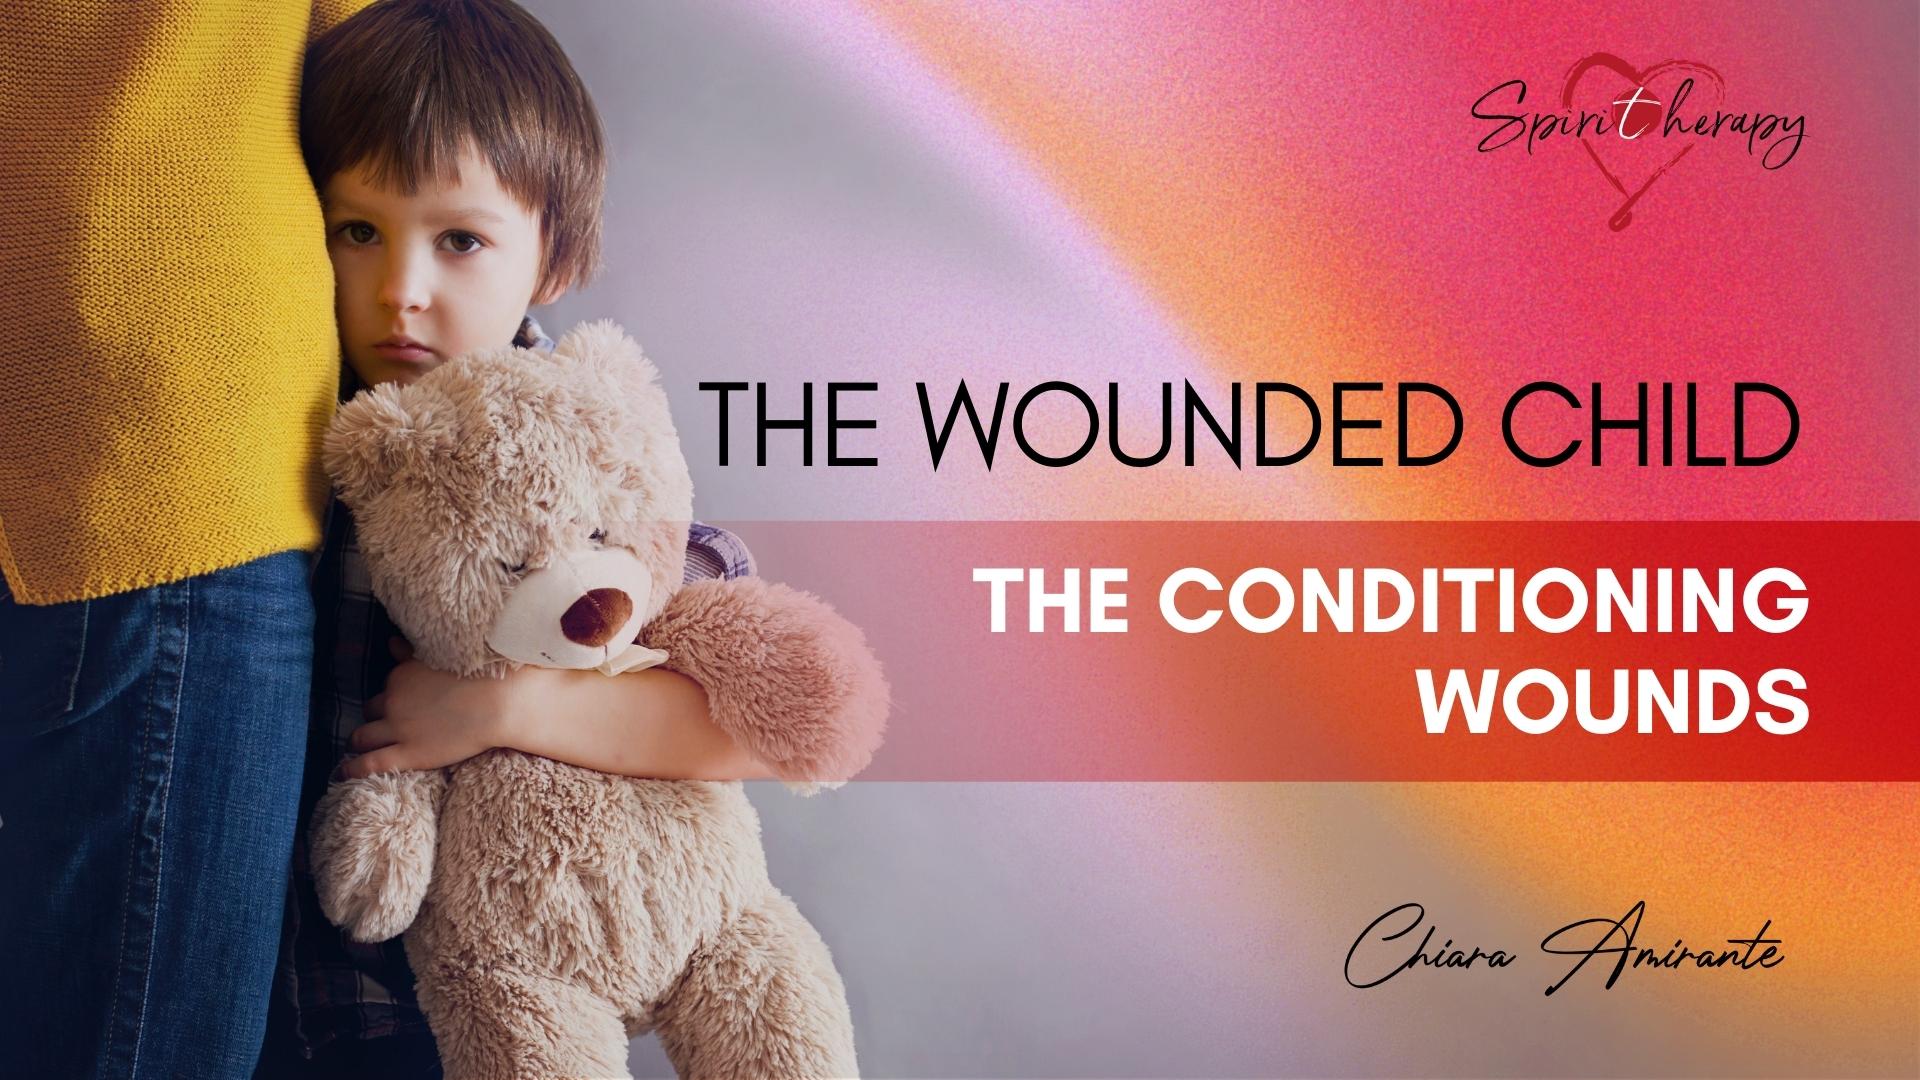 THE WOUNDED CHILD - The conditioning wounds - Chiara Amirante